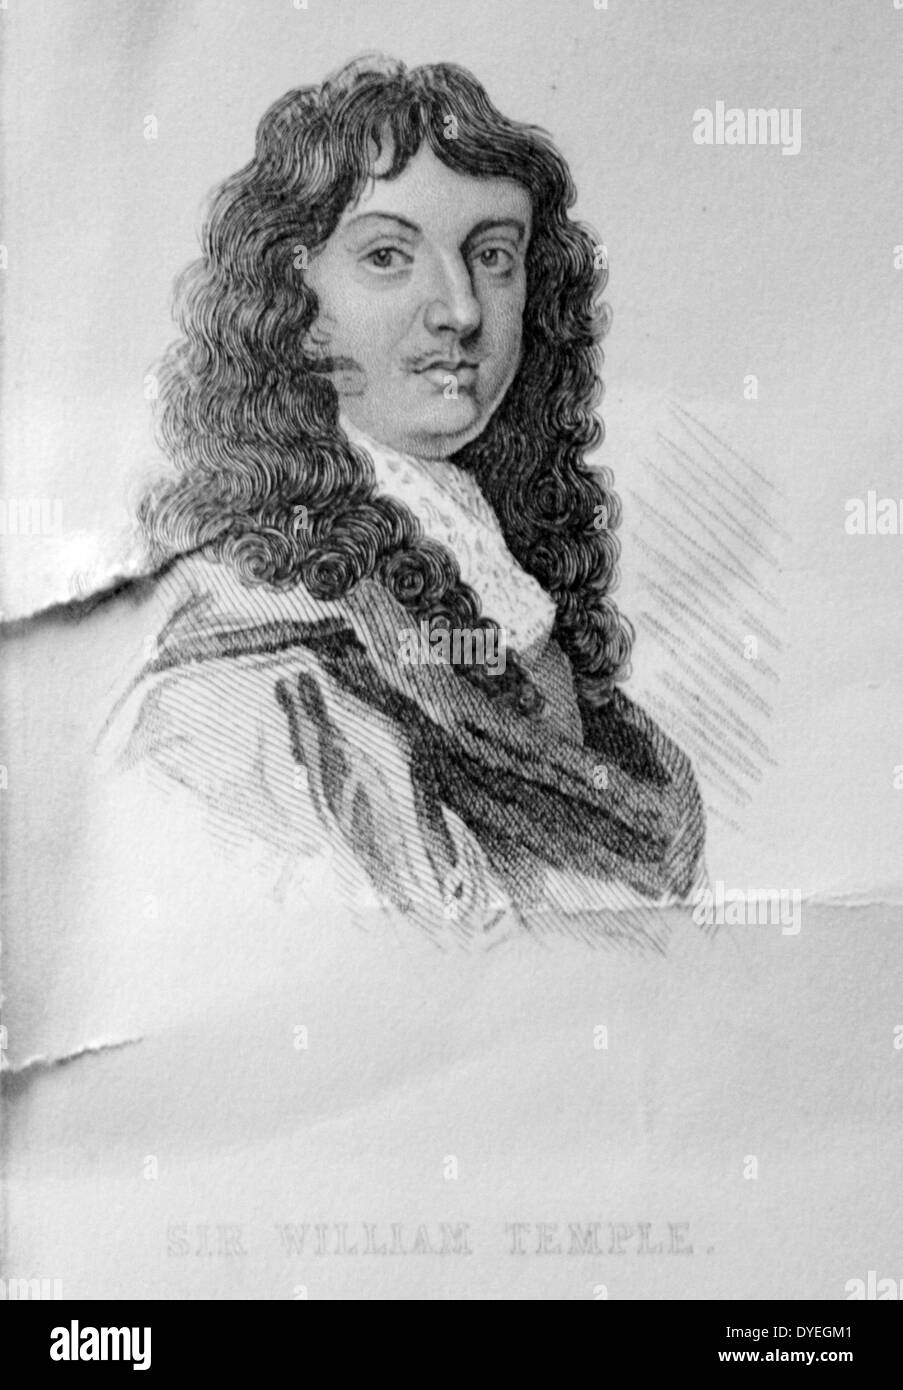 Sir William Temple (1628-1699) was an English statesman and essayist. Stock Photo